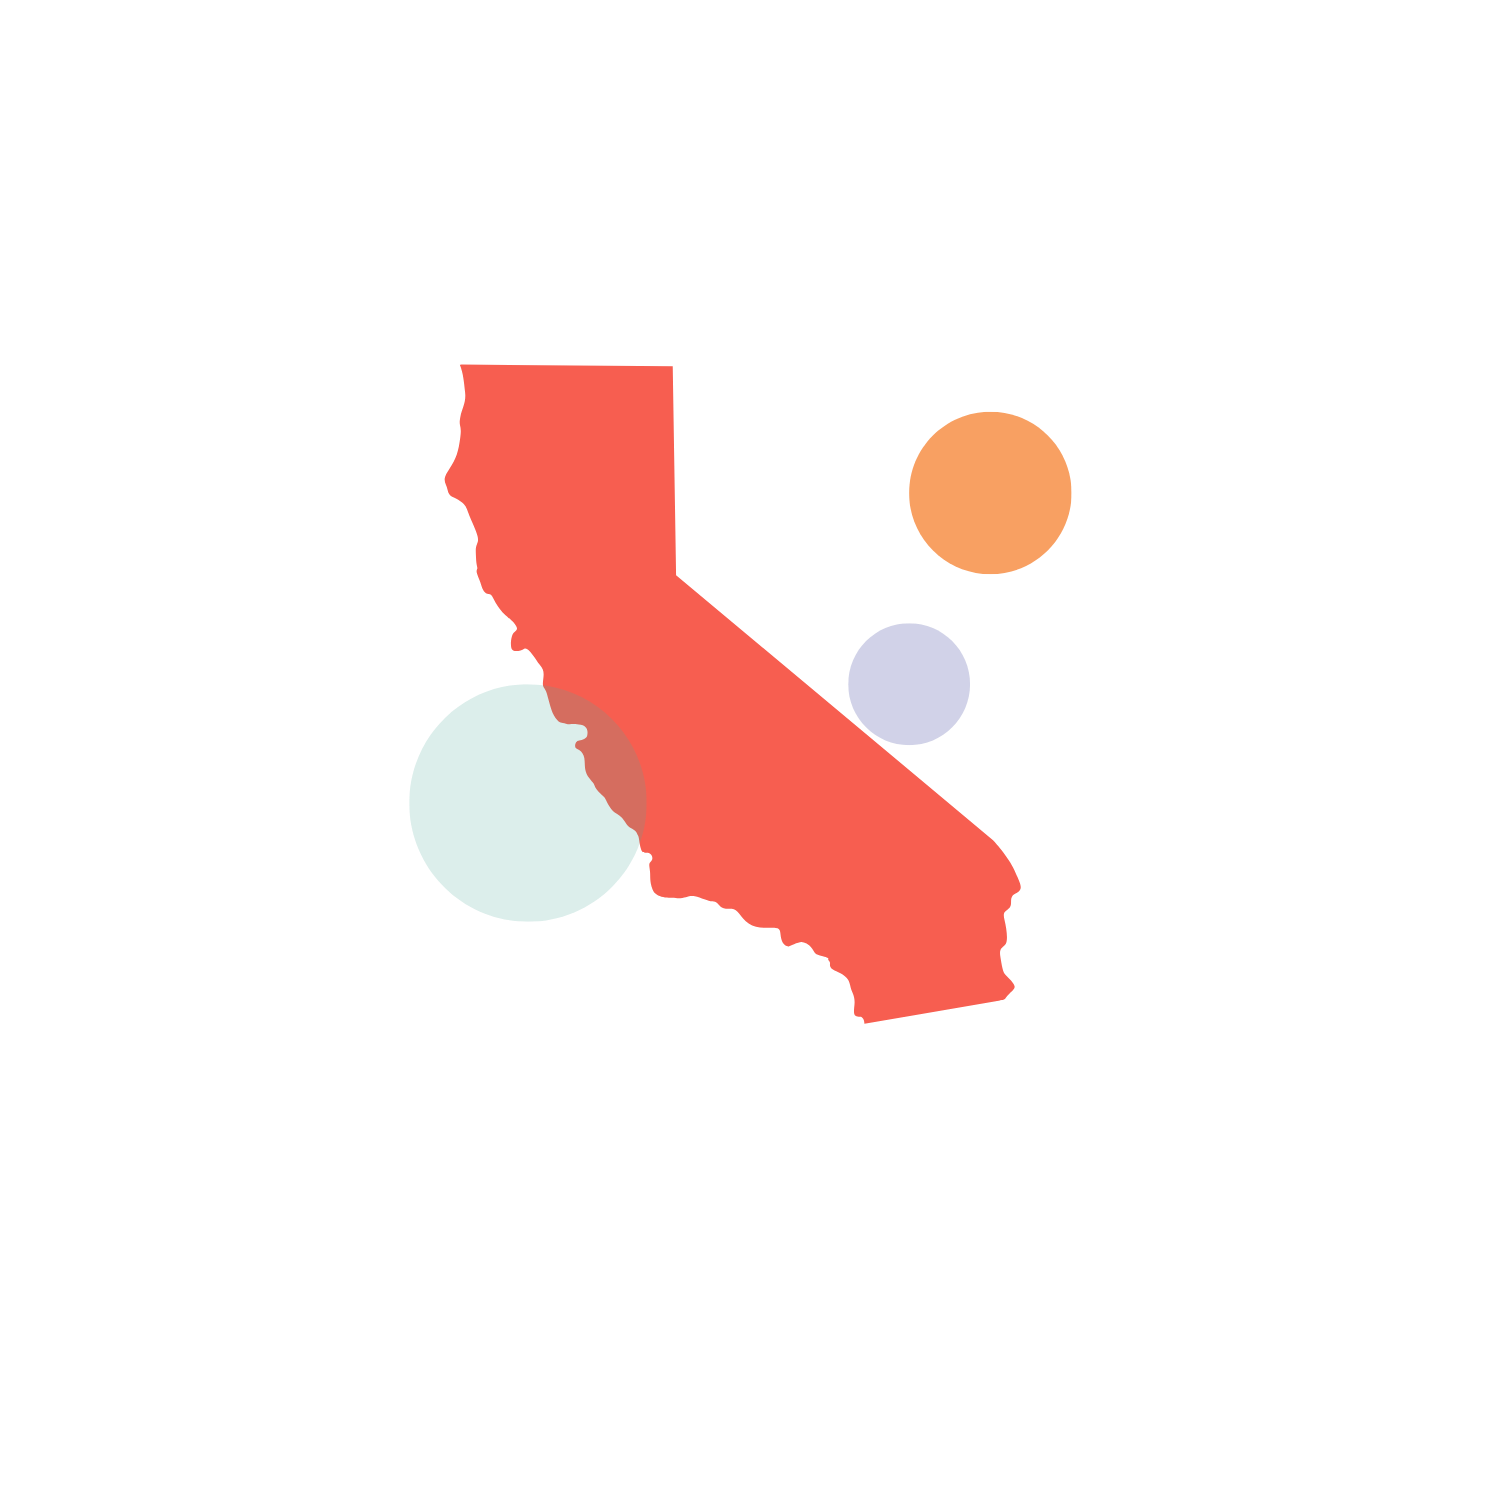 Illustrated outline of the state of California.